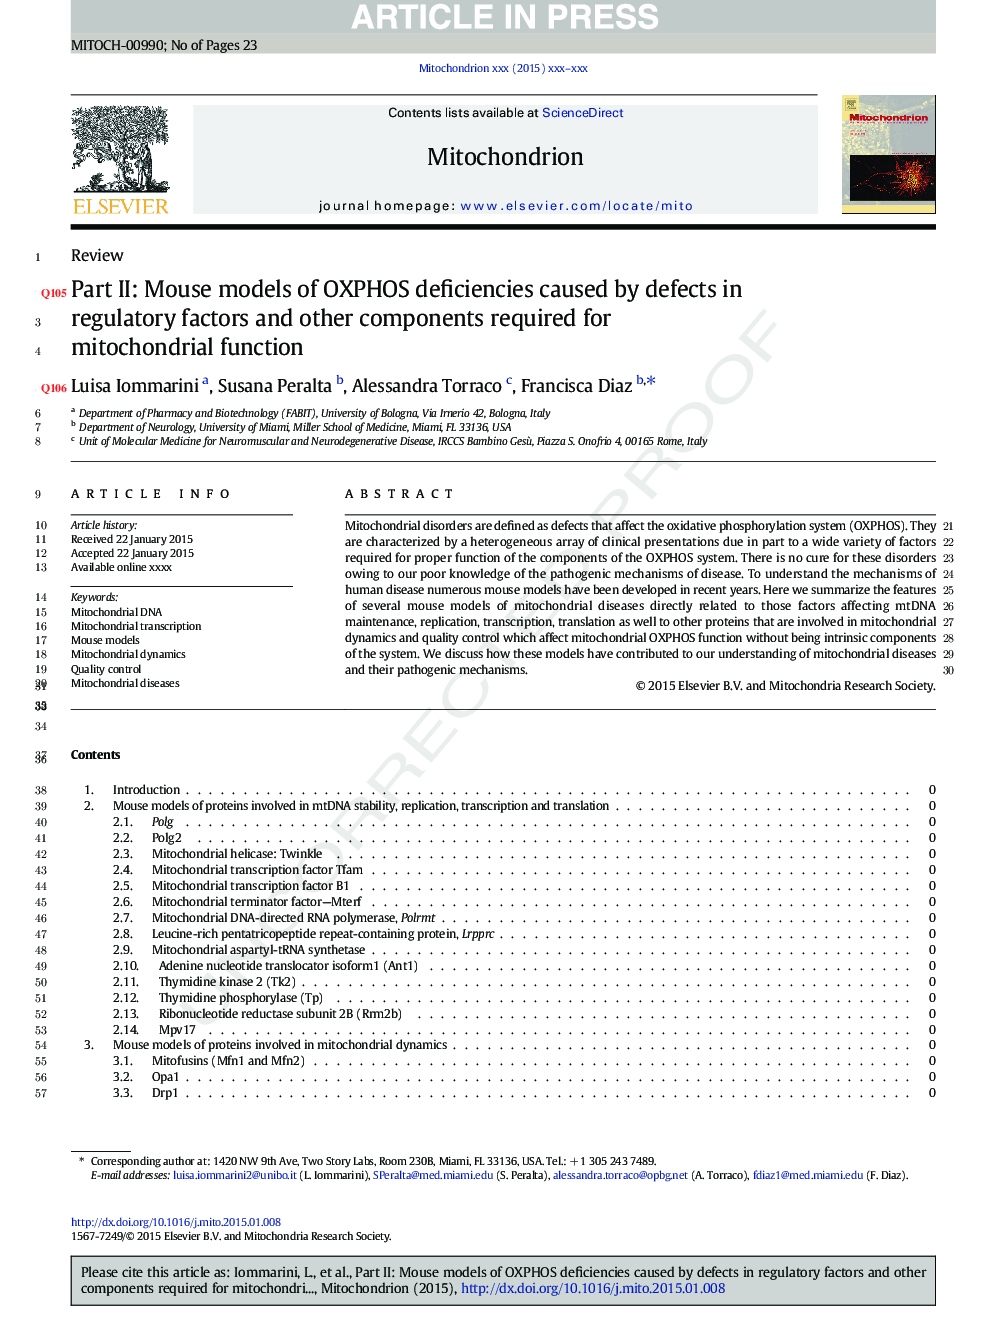 Mitochondrial Diseases Part II: Mouse models of OXPHOS deficiencies caused by defects in regulatory factors and other components required for mitochondrial function